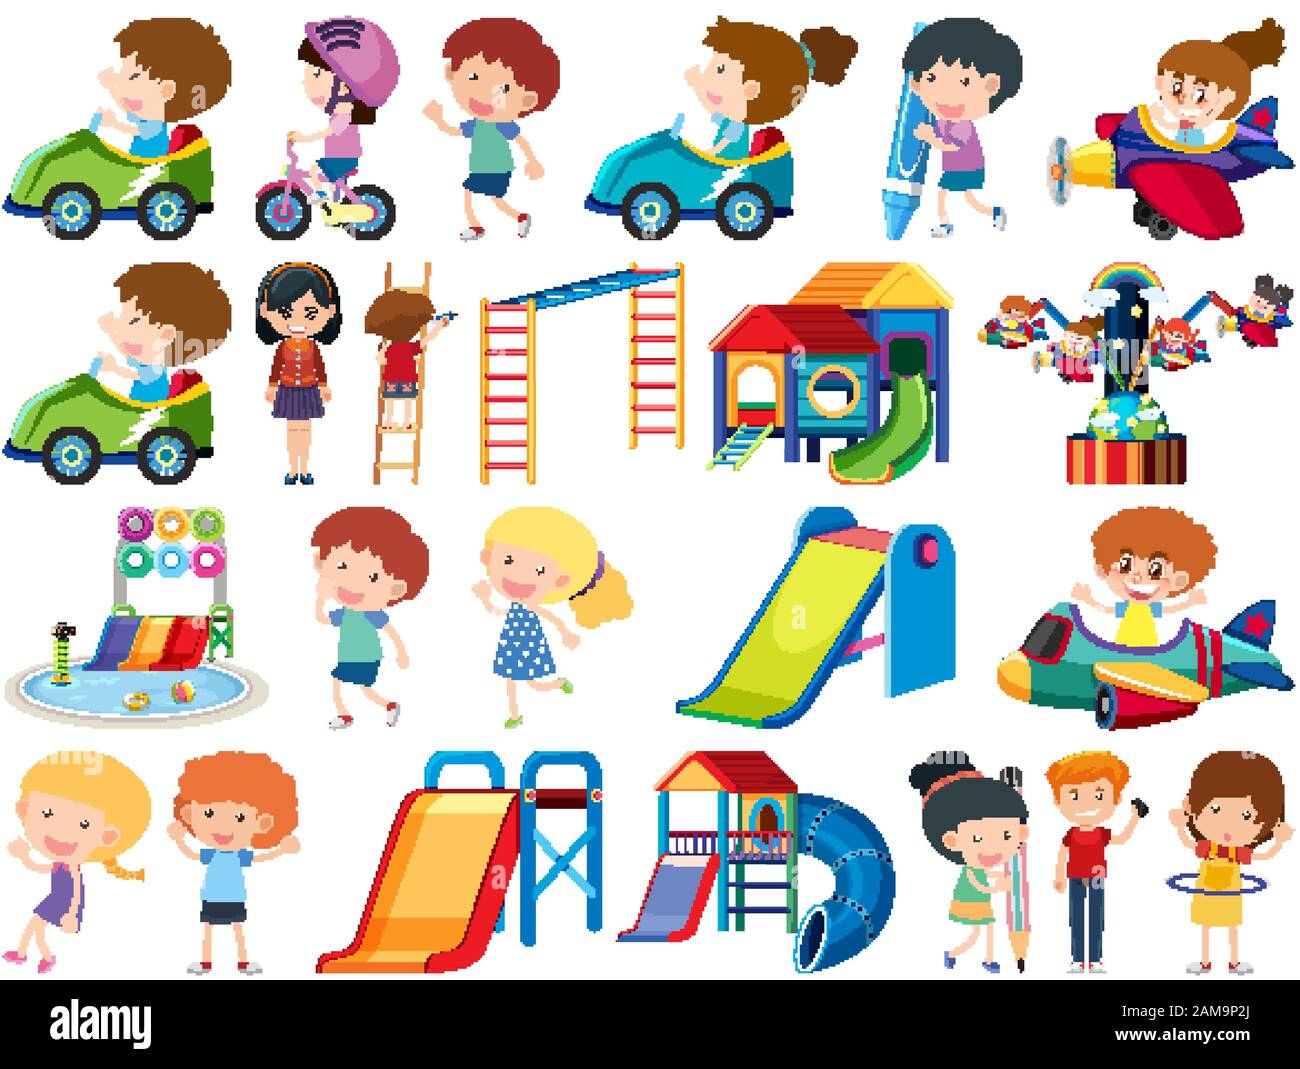 Large set of isolated objects of kids and playground illustration Stock Vector